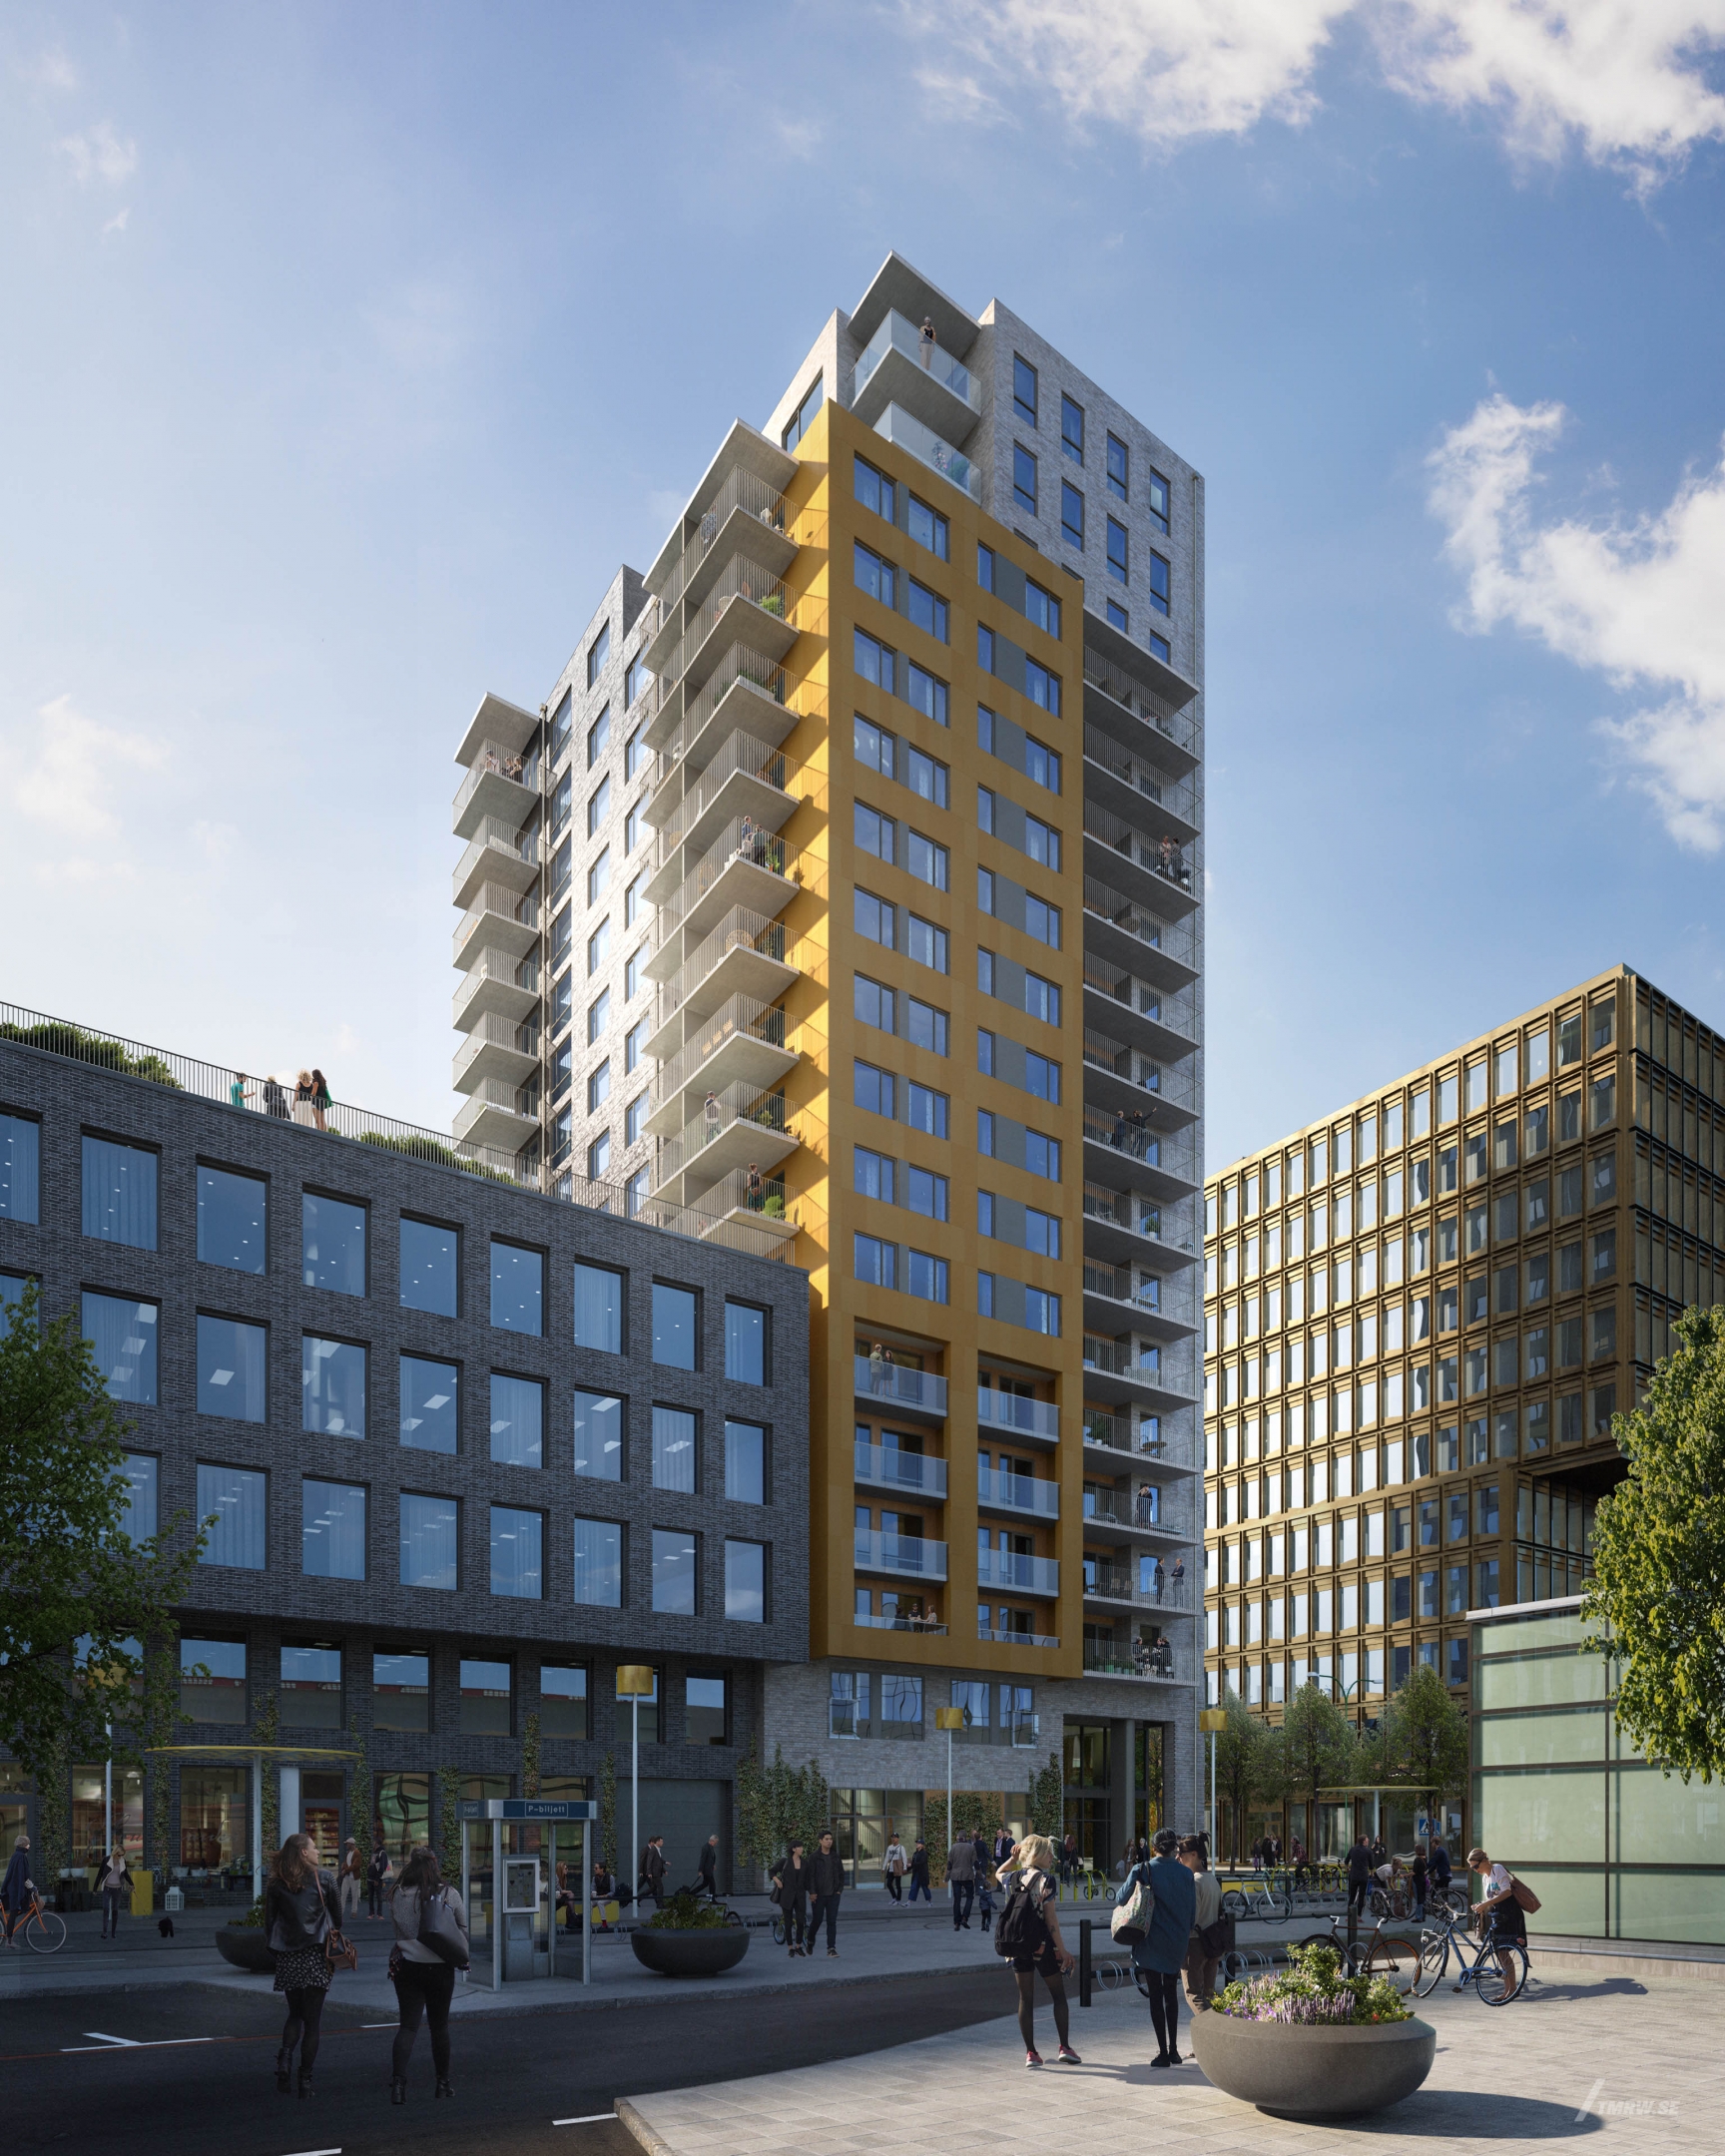 Architectural visualization of Malmö Living for Nordr a apartment building with yellow facade from an exterior view in day light.